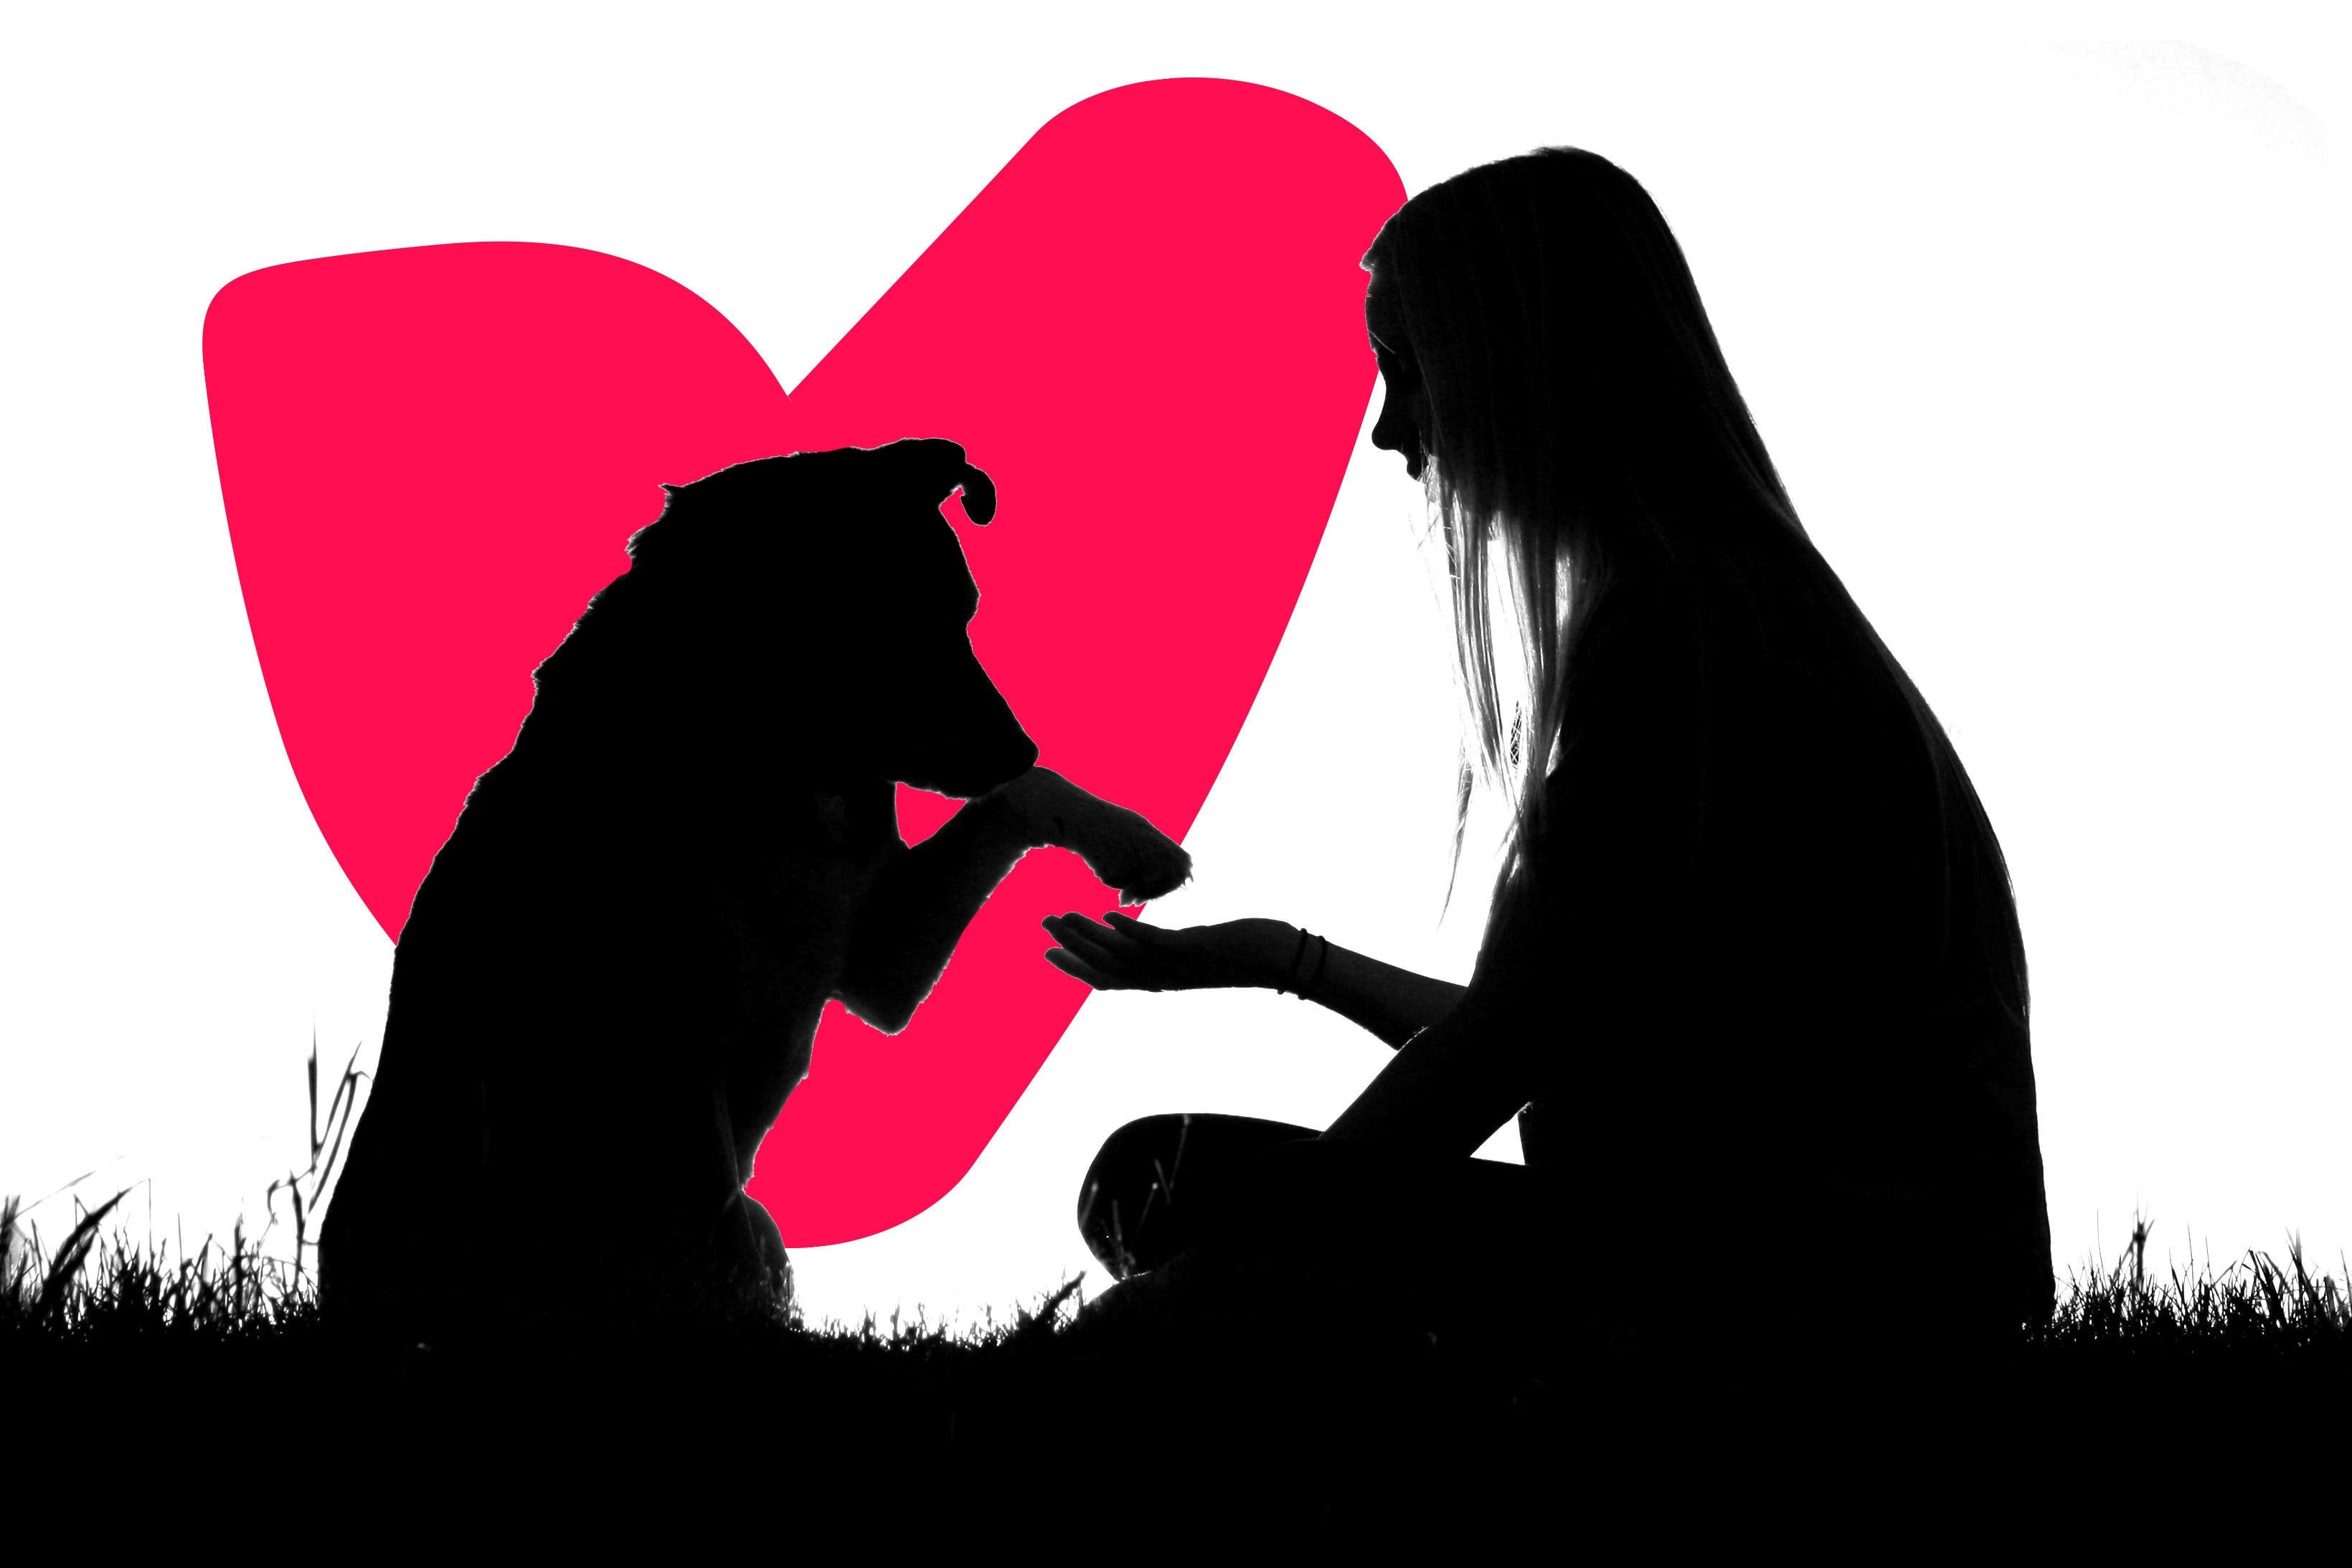 The silhouette of a dog offering his paw to a woman in a field.